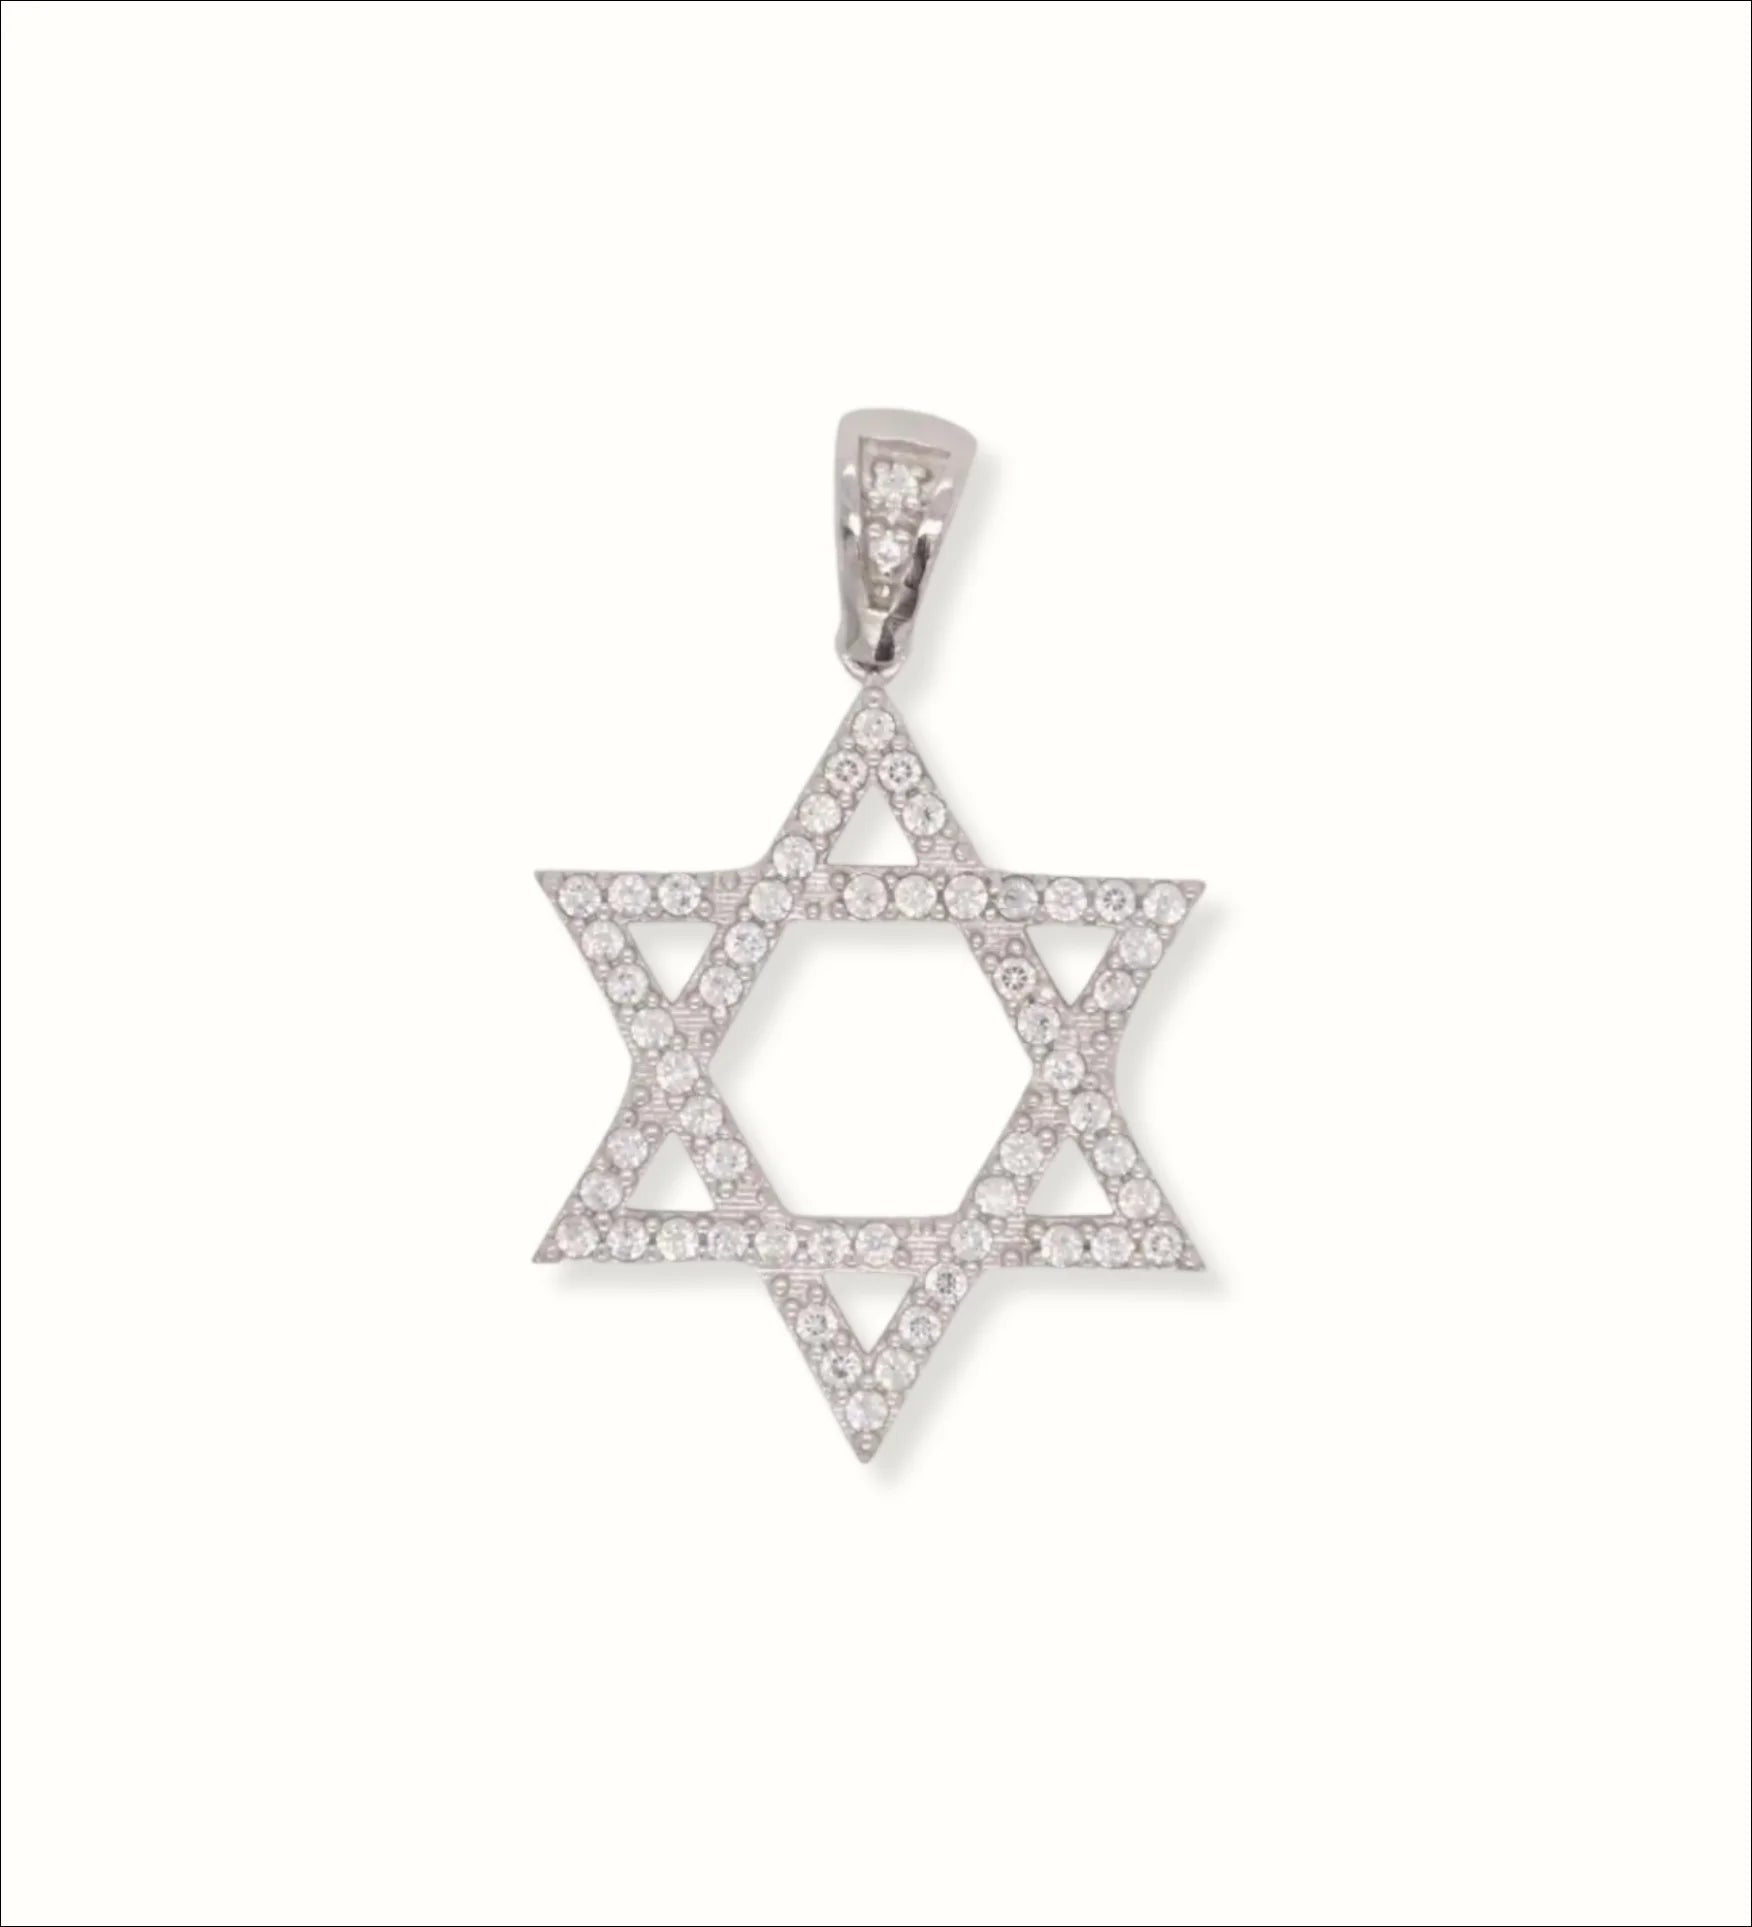 Elegant 18k White Gold Star of David with CZ | Home page